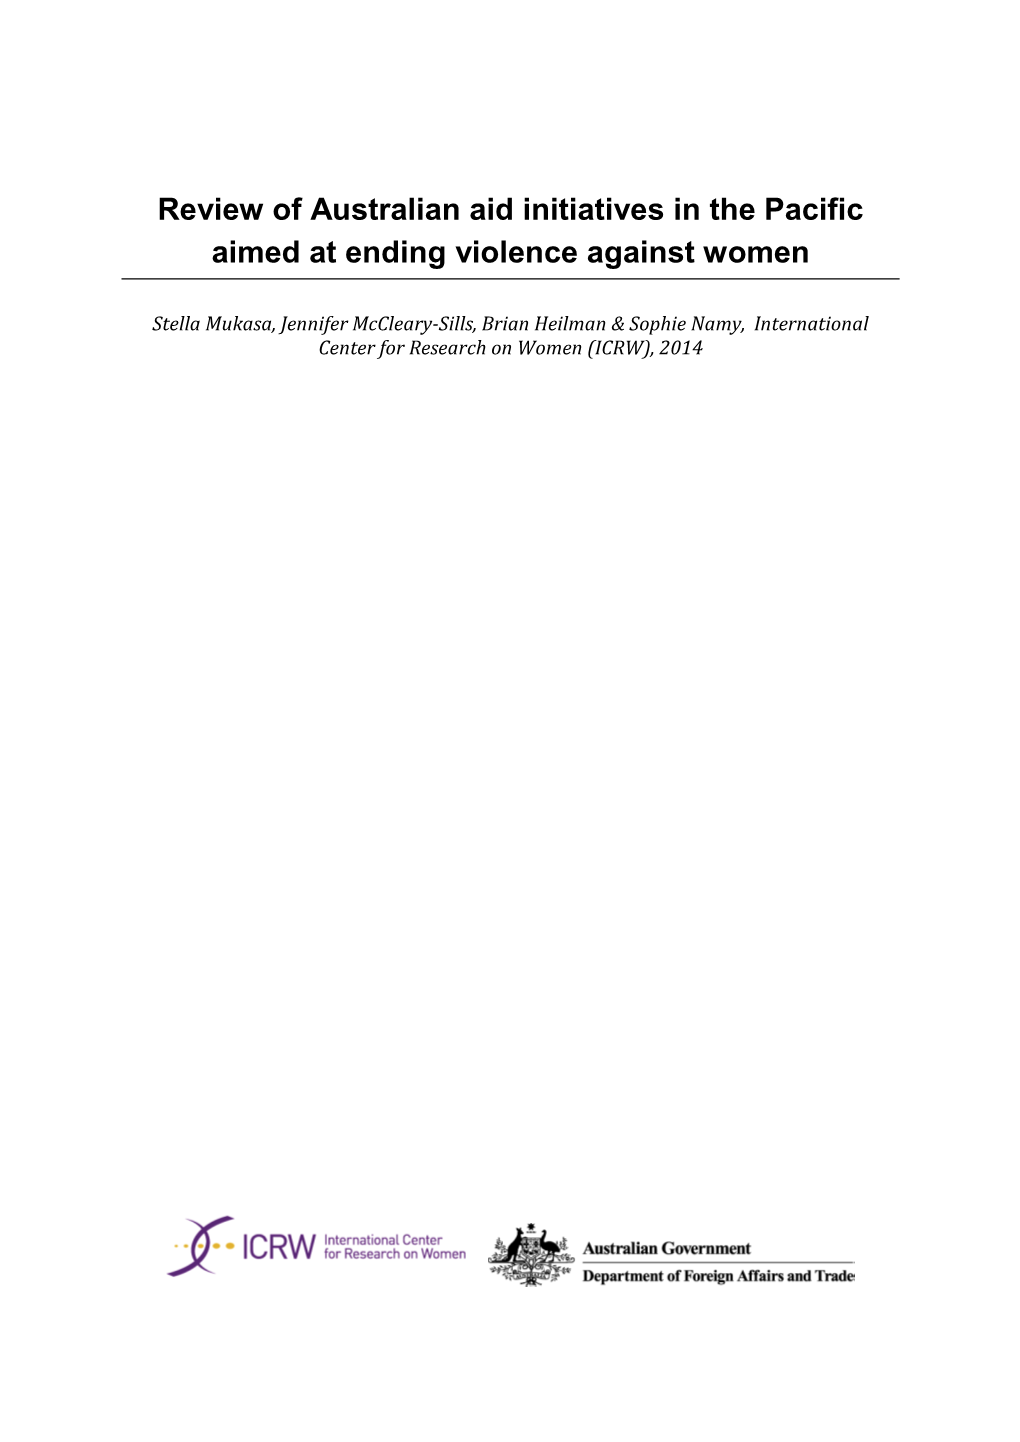 Review of Australian Aid Initiatives in the Pacific Aimed at Ending Violence Against Women